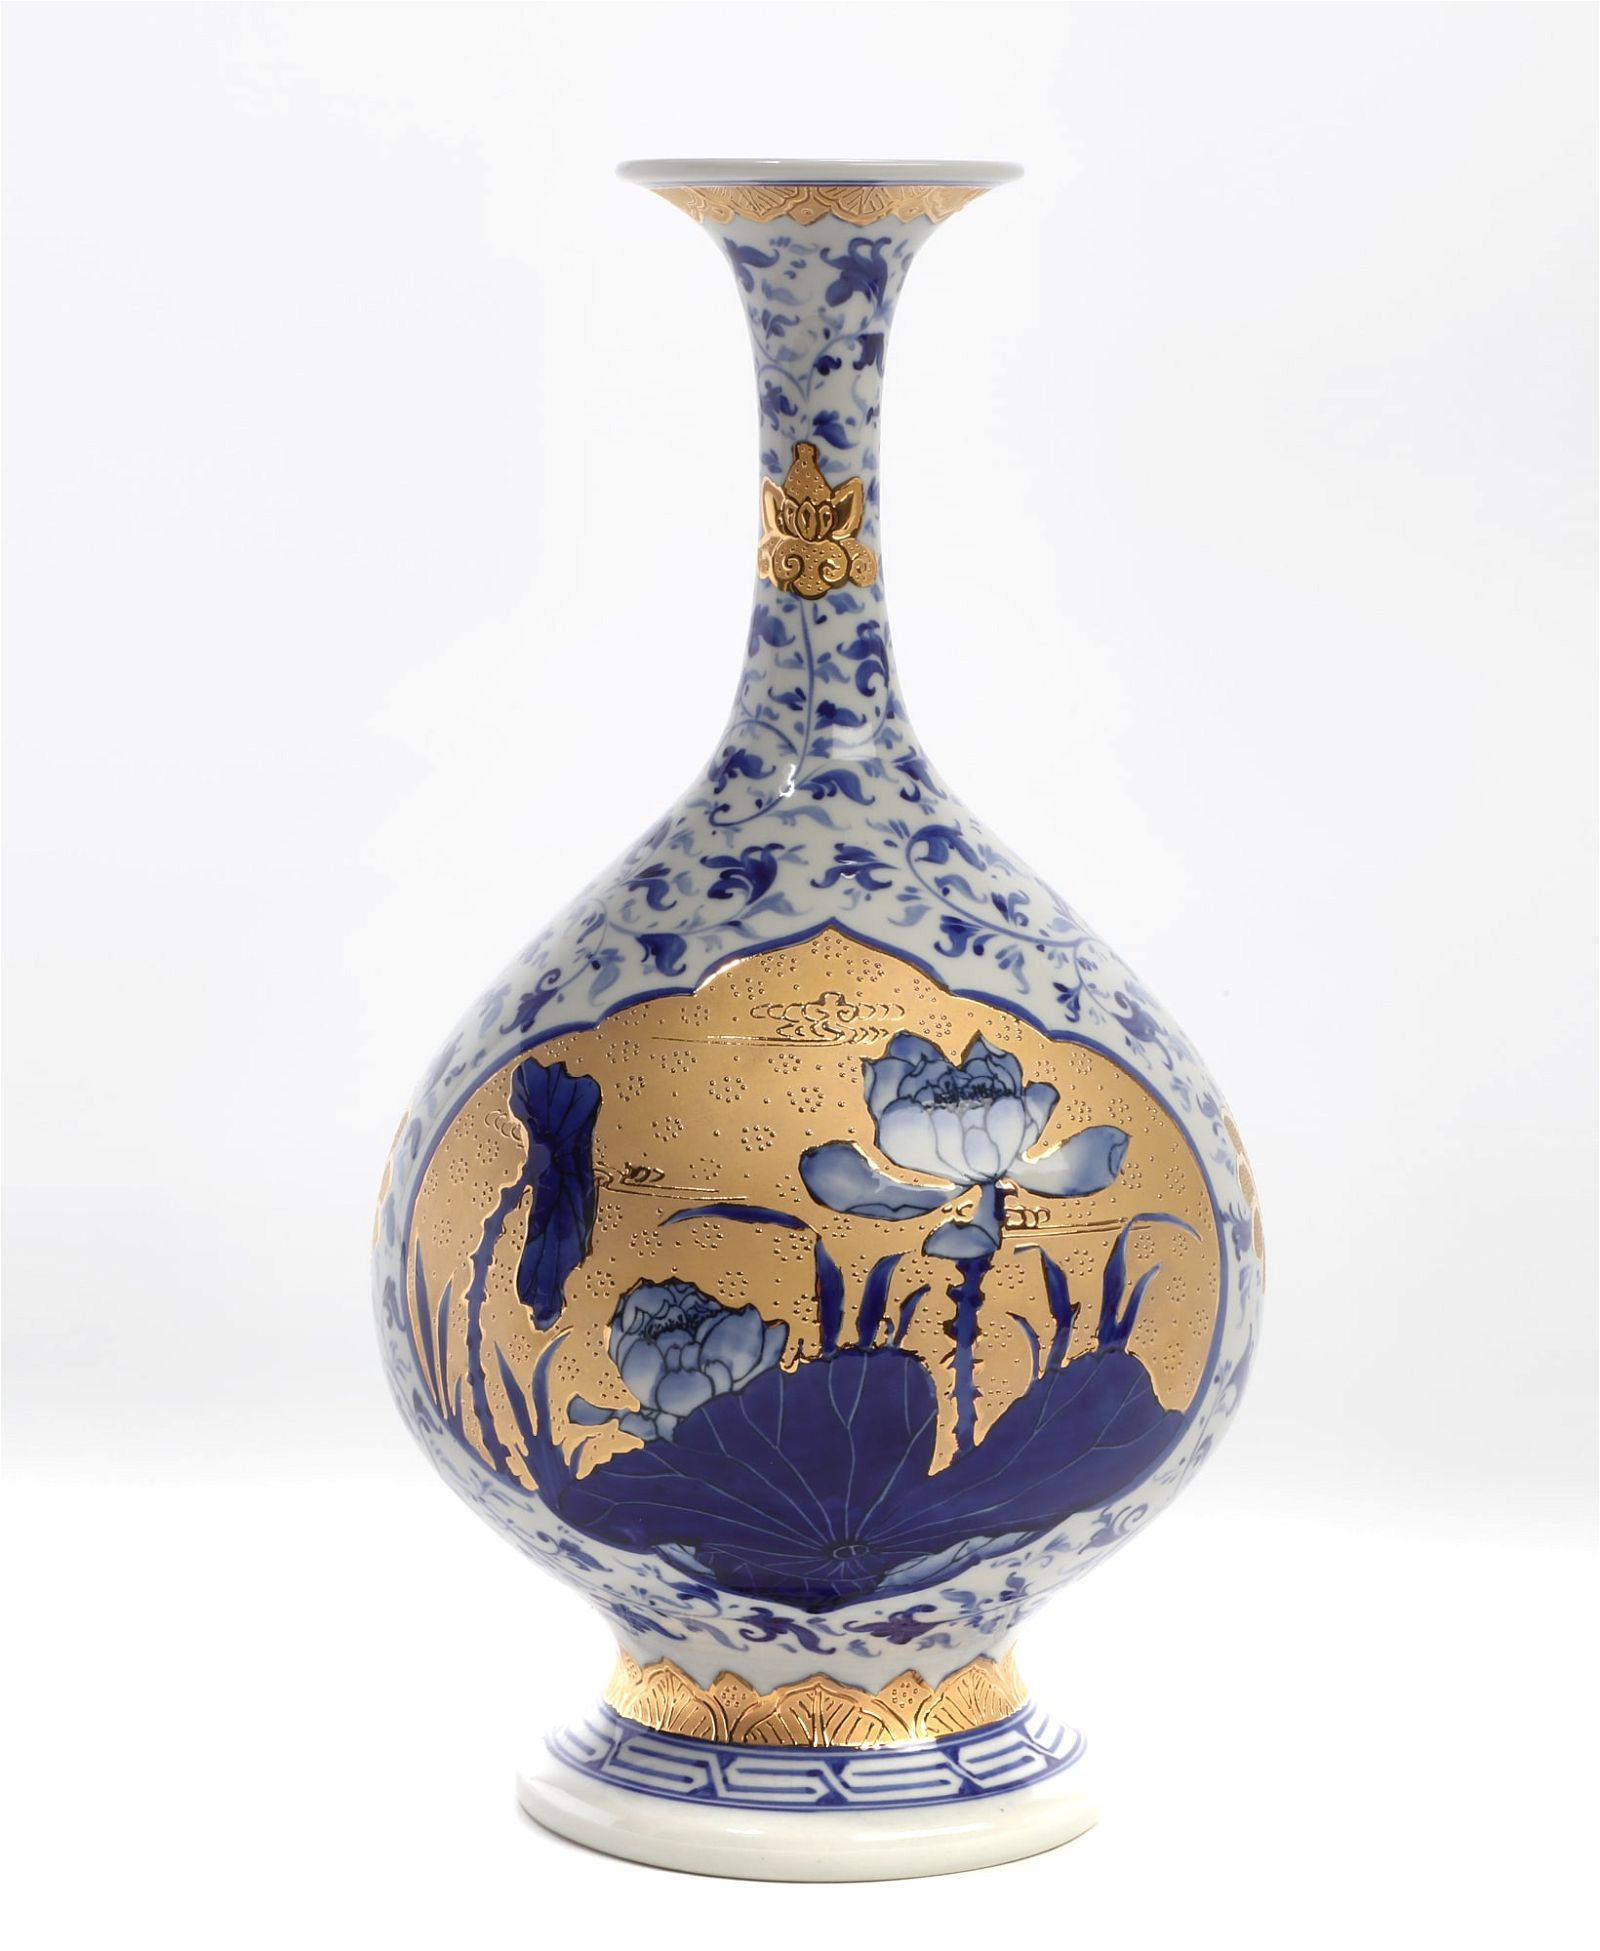 AN ASIAN BLUE AND GILT DECORATED PORCELAIN